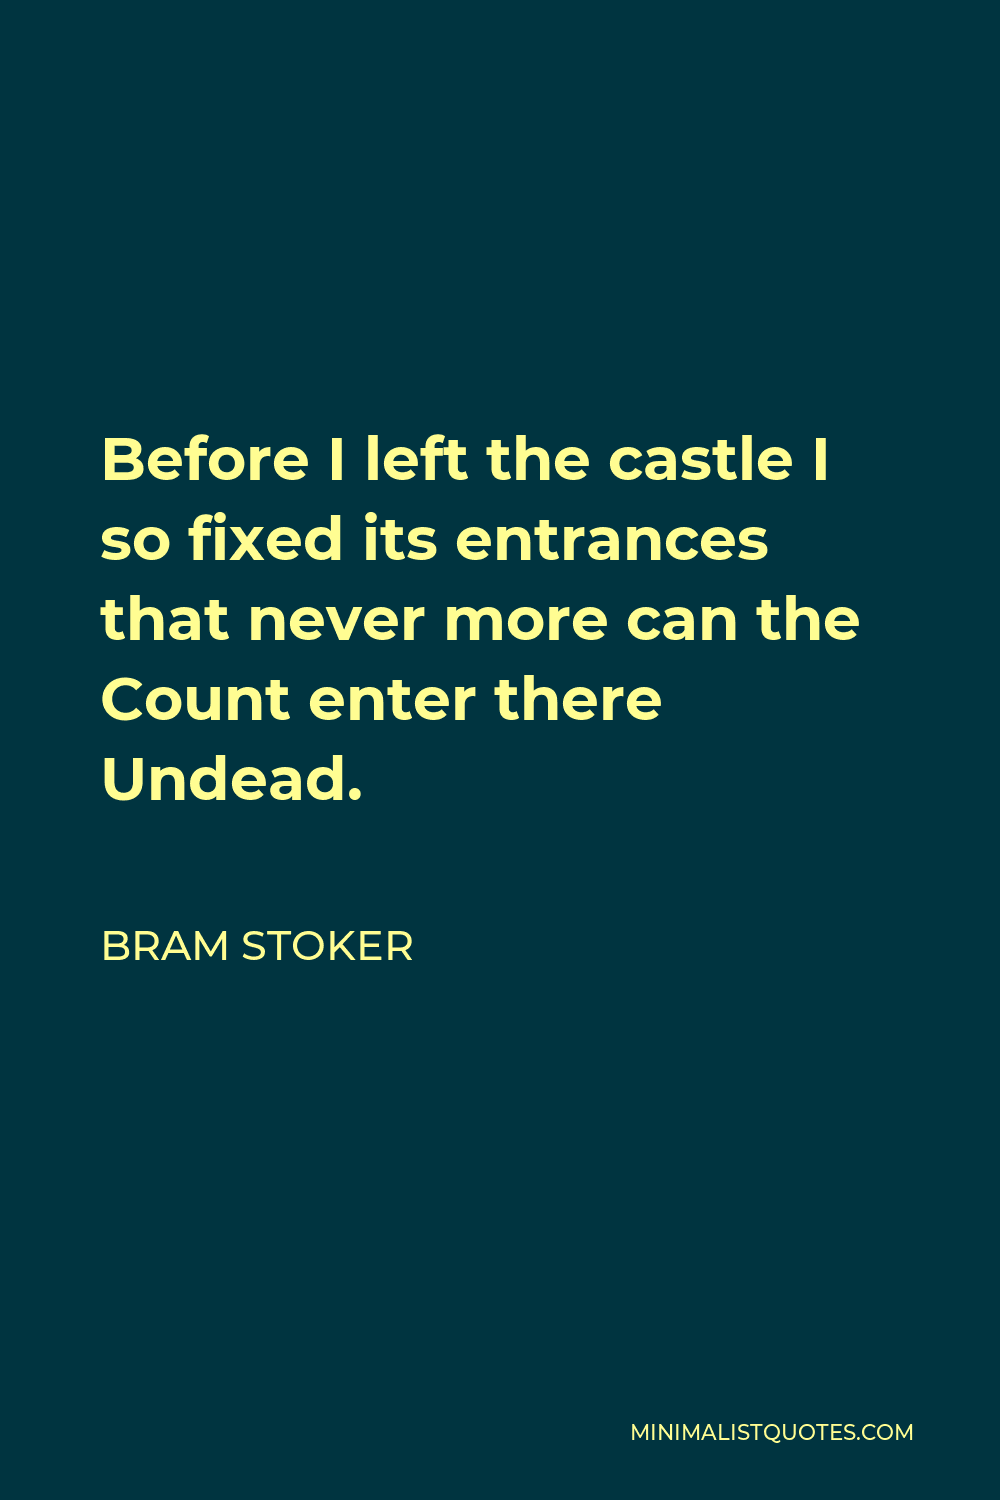 Bram Stoker Quote - Before I left the castle I so fixed its entrances that never more can the Count enter there Undead.